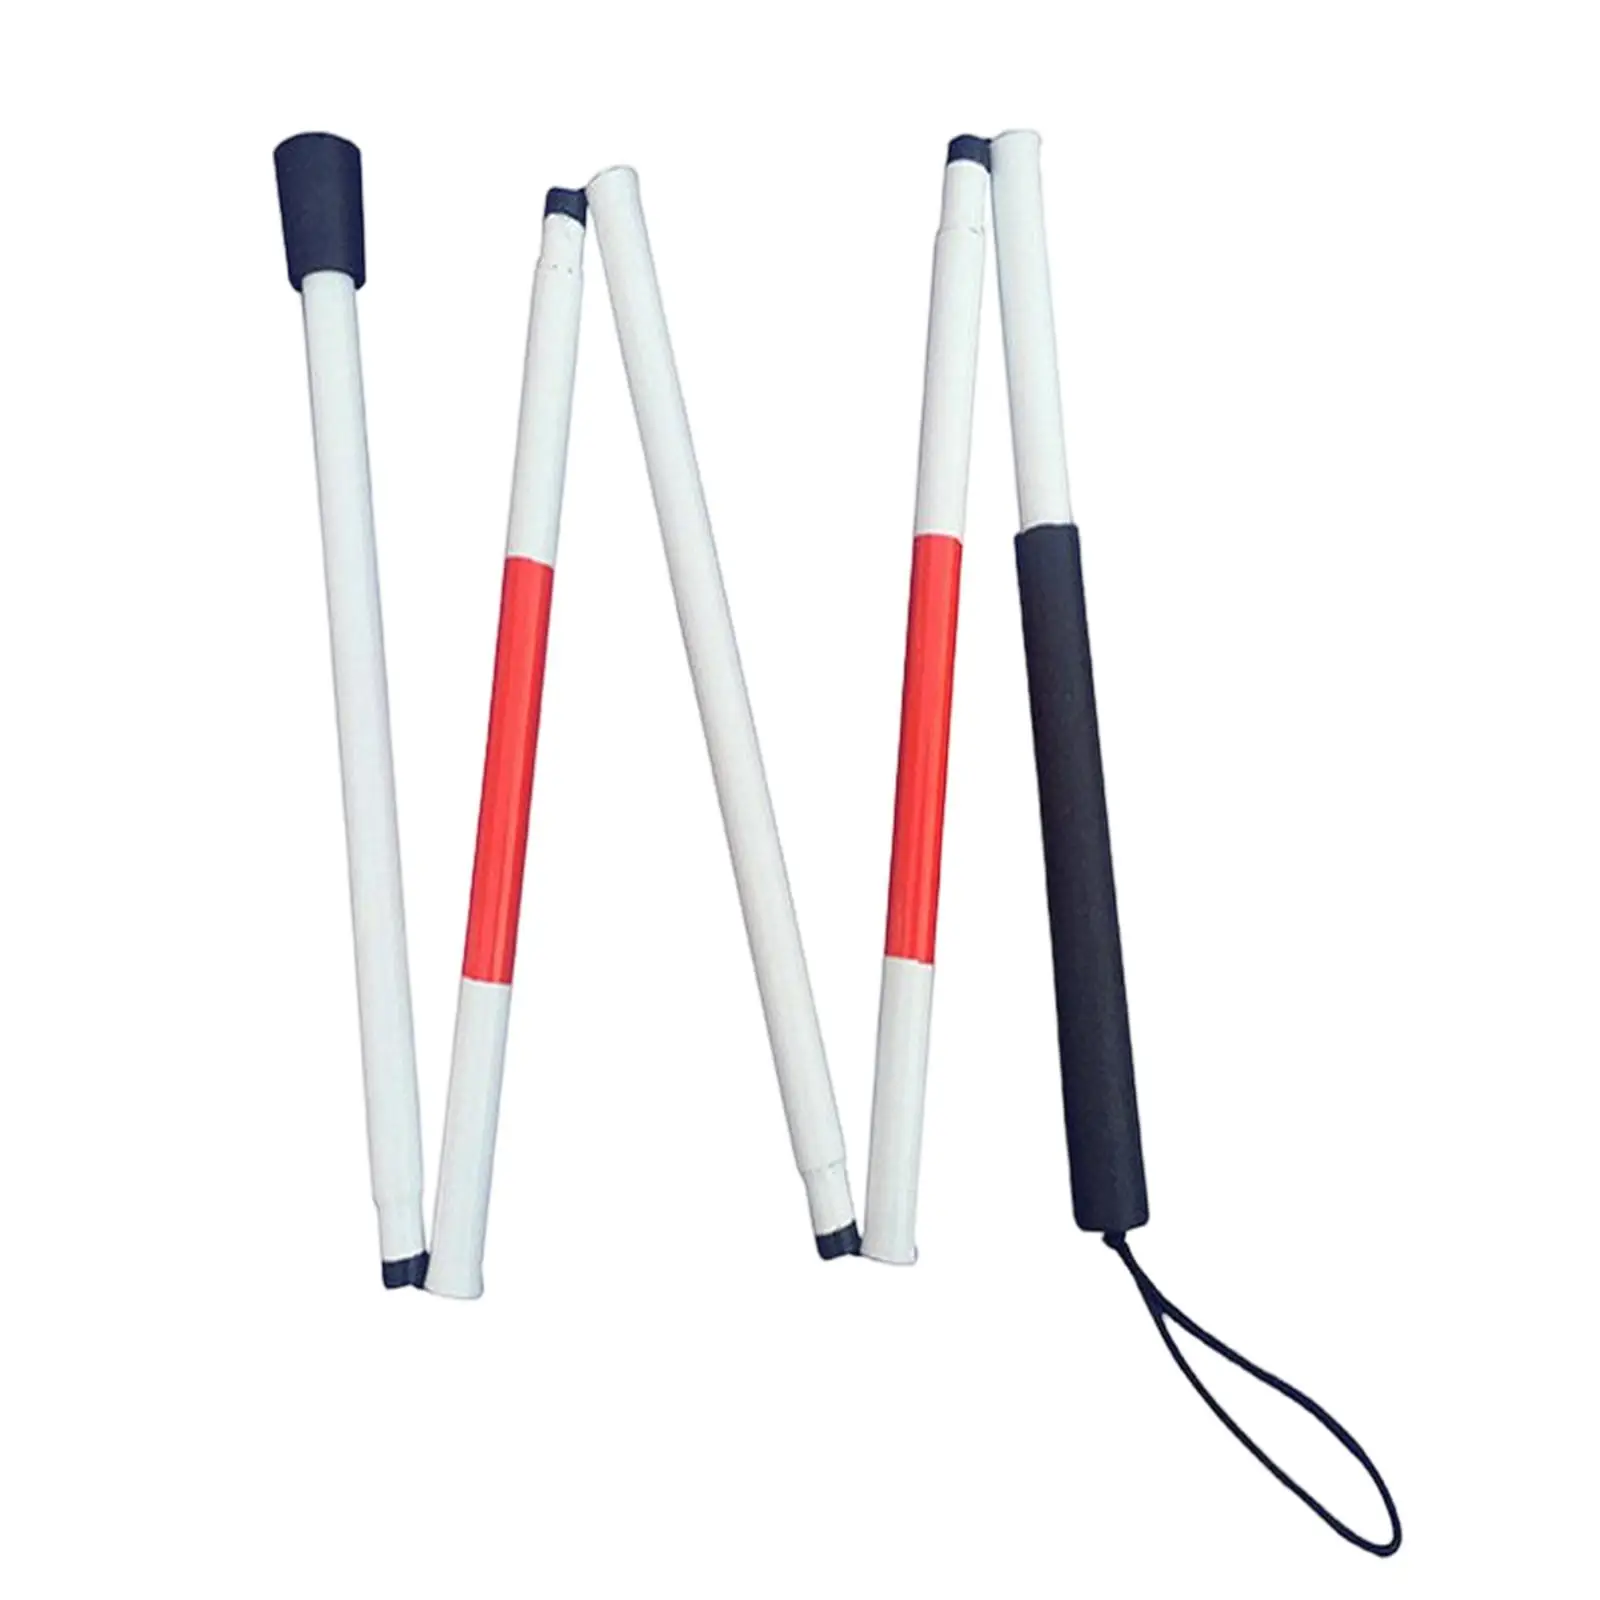 Folding Mobility Cane with Red Reflective Tape Non Slip Handle Aluminum Anti Shock Foldable Walking Stick for Visually Impaired